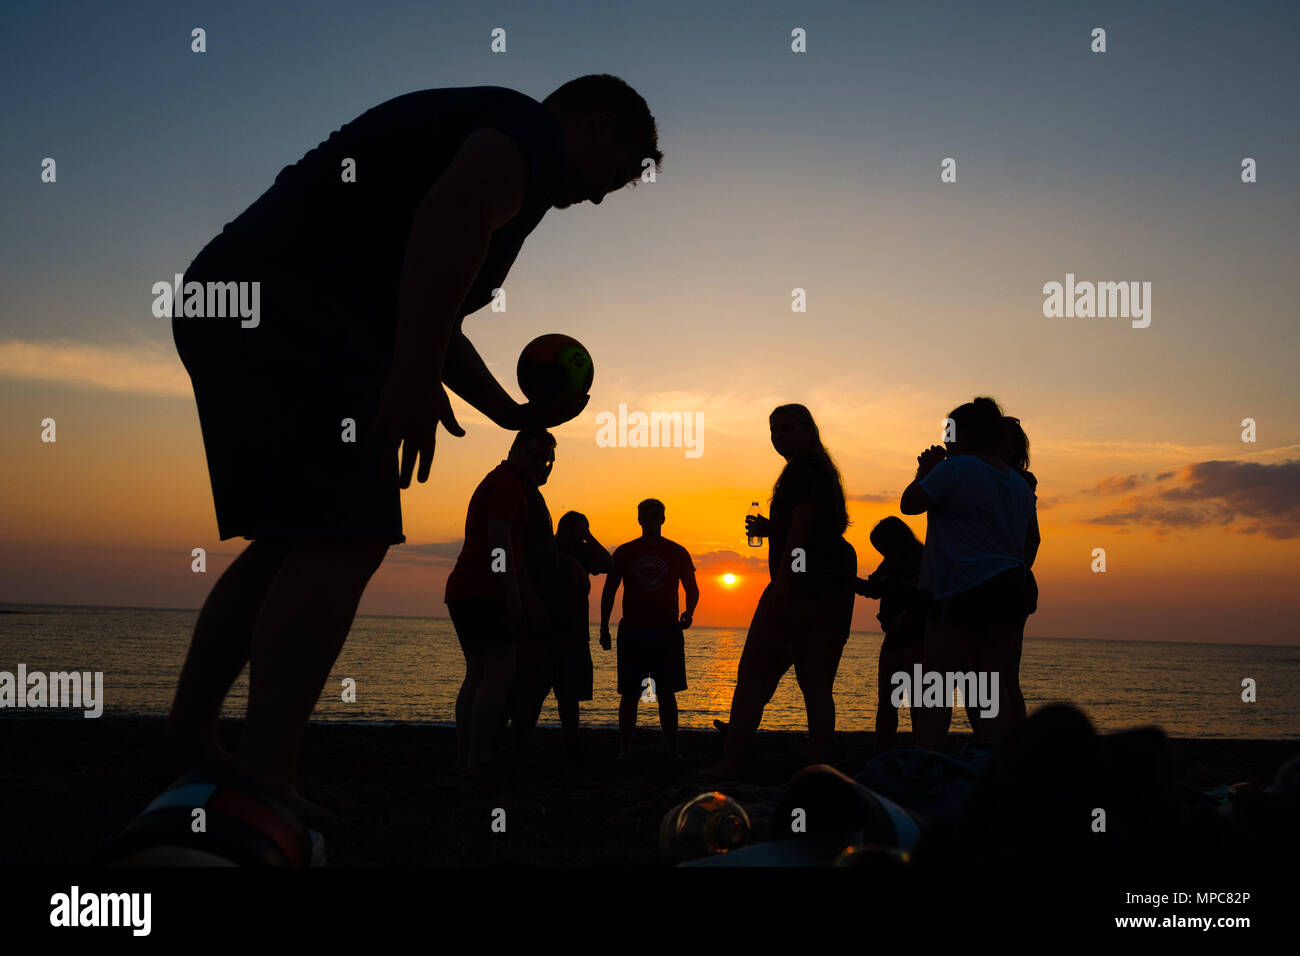 Aberystwyth  Wales UK, Tuesday 22 May 2018  UK Weather: A group of university students playing ball games on the beach are silhouetted against the setting sun in Aberystwyth, at the end of a day of warm spring sunshine   photo © Keith Morris / Alamy Live News Stock Photo